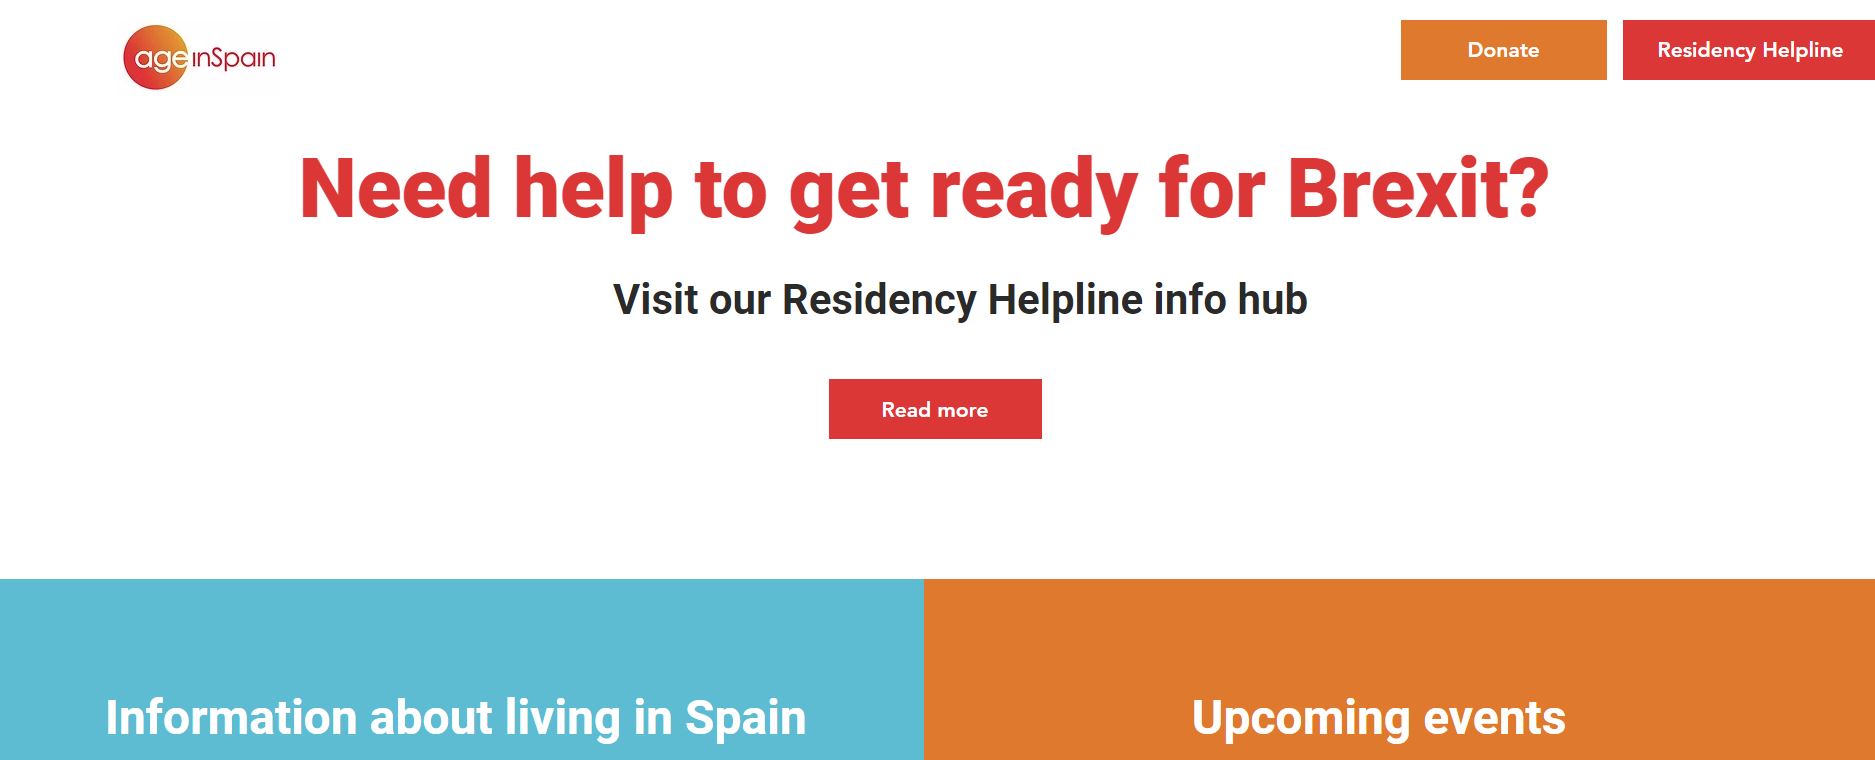 Age in Spain assists UK retirees residing in the country